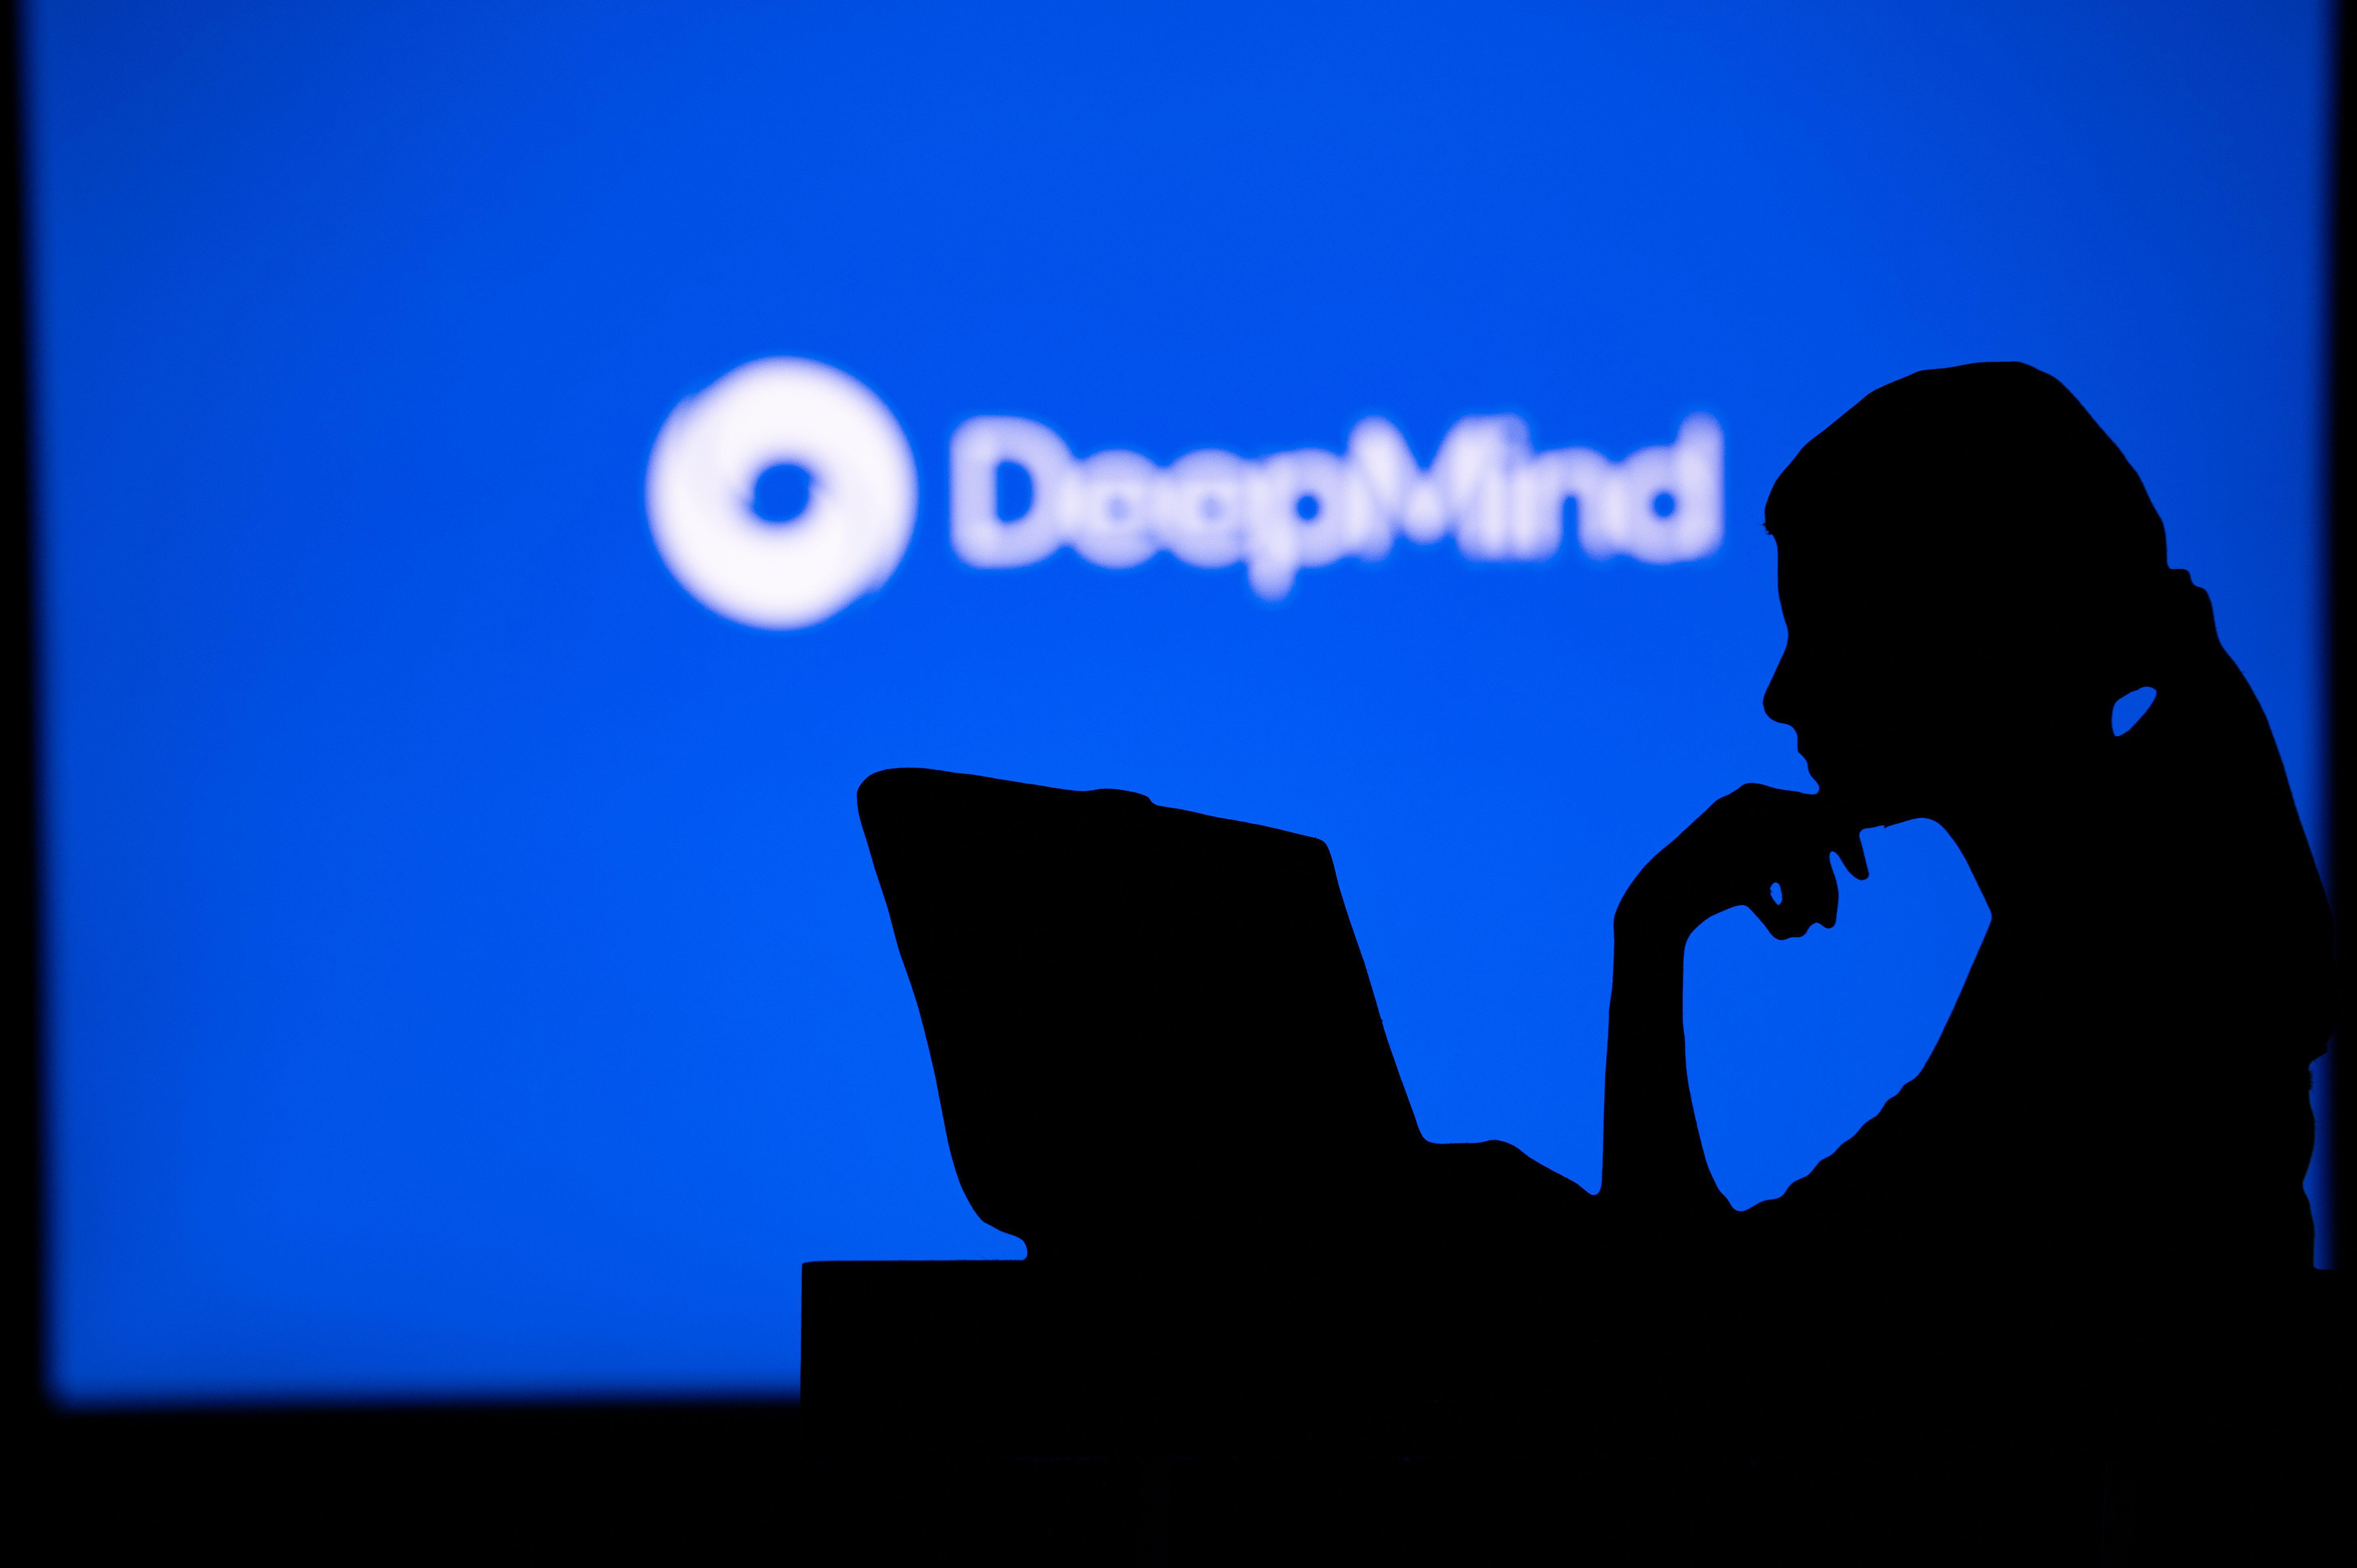 Woman working in front of DeepMind logo